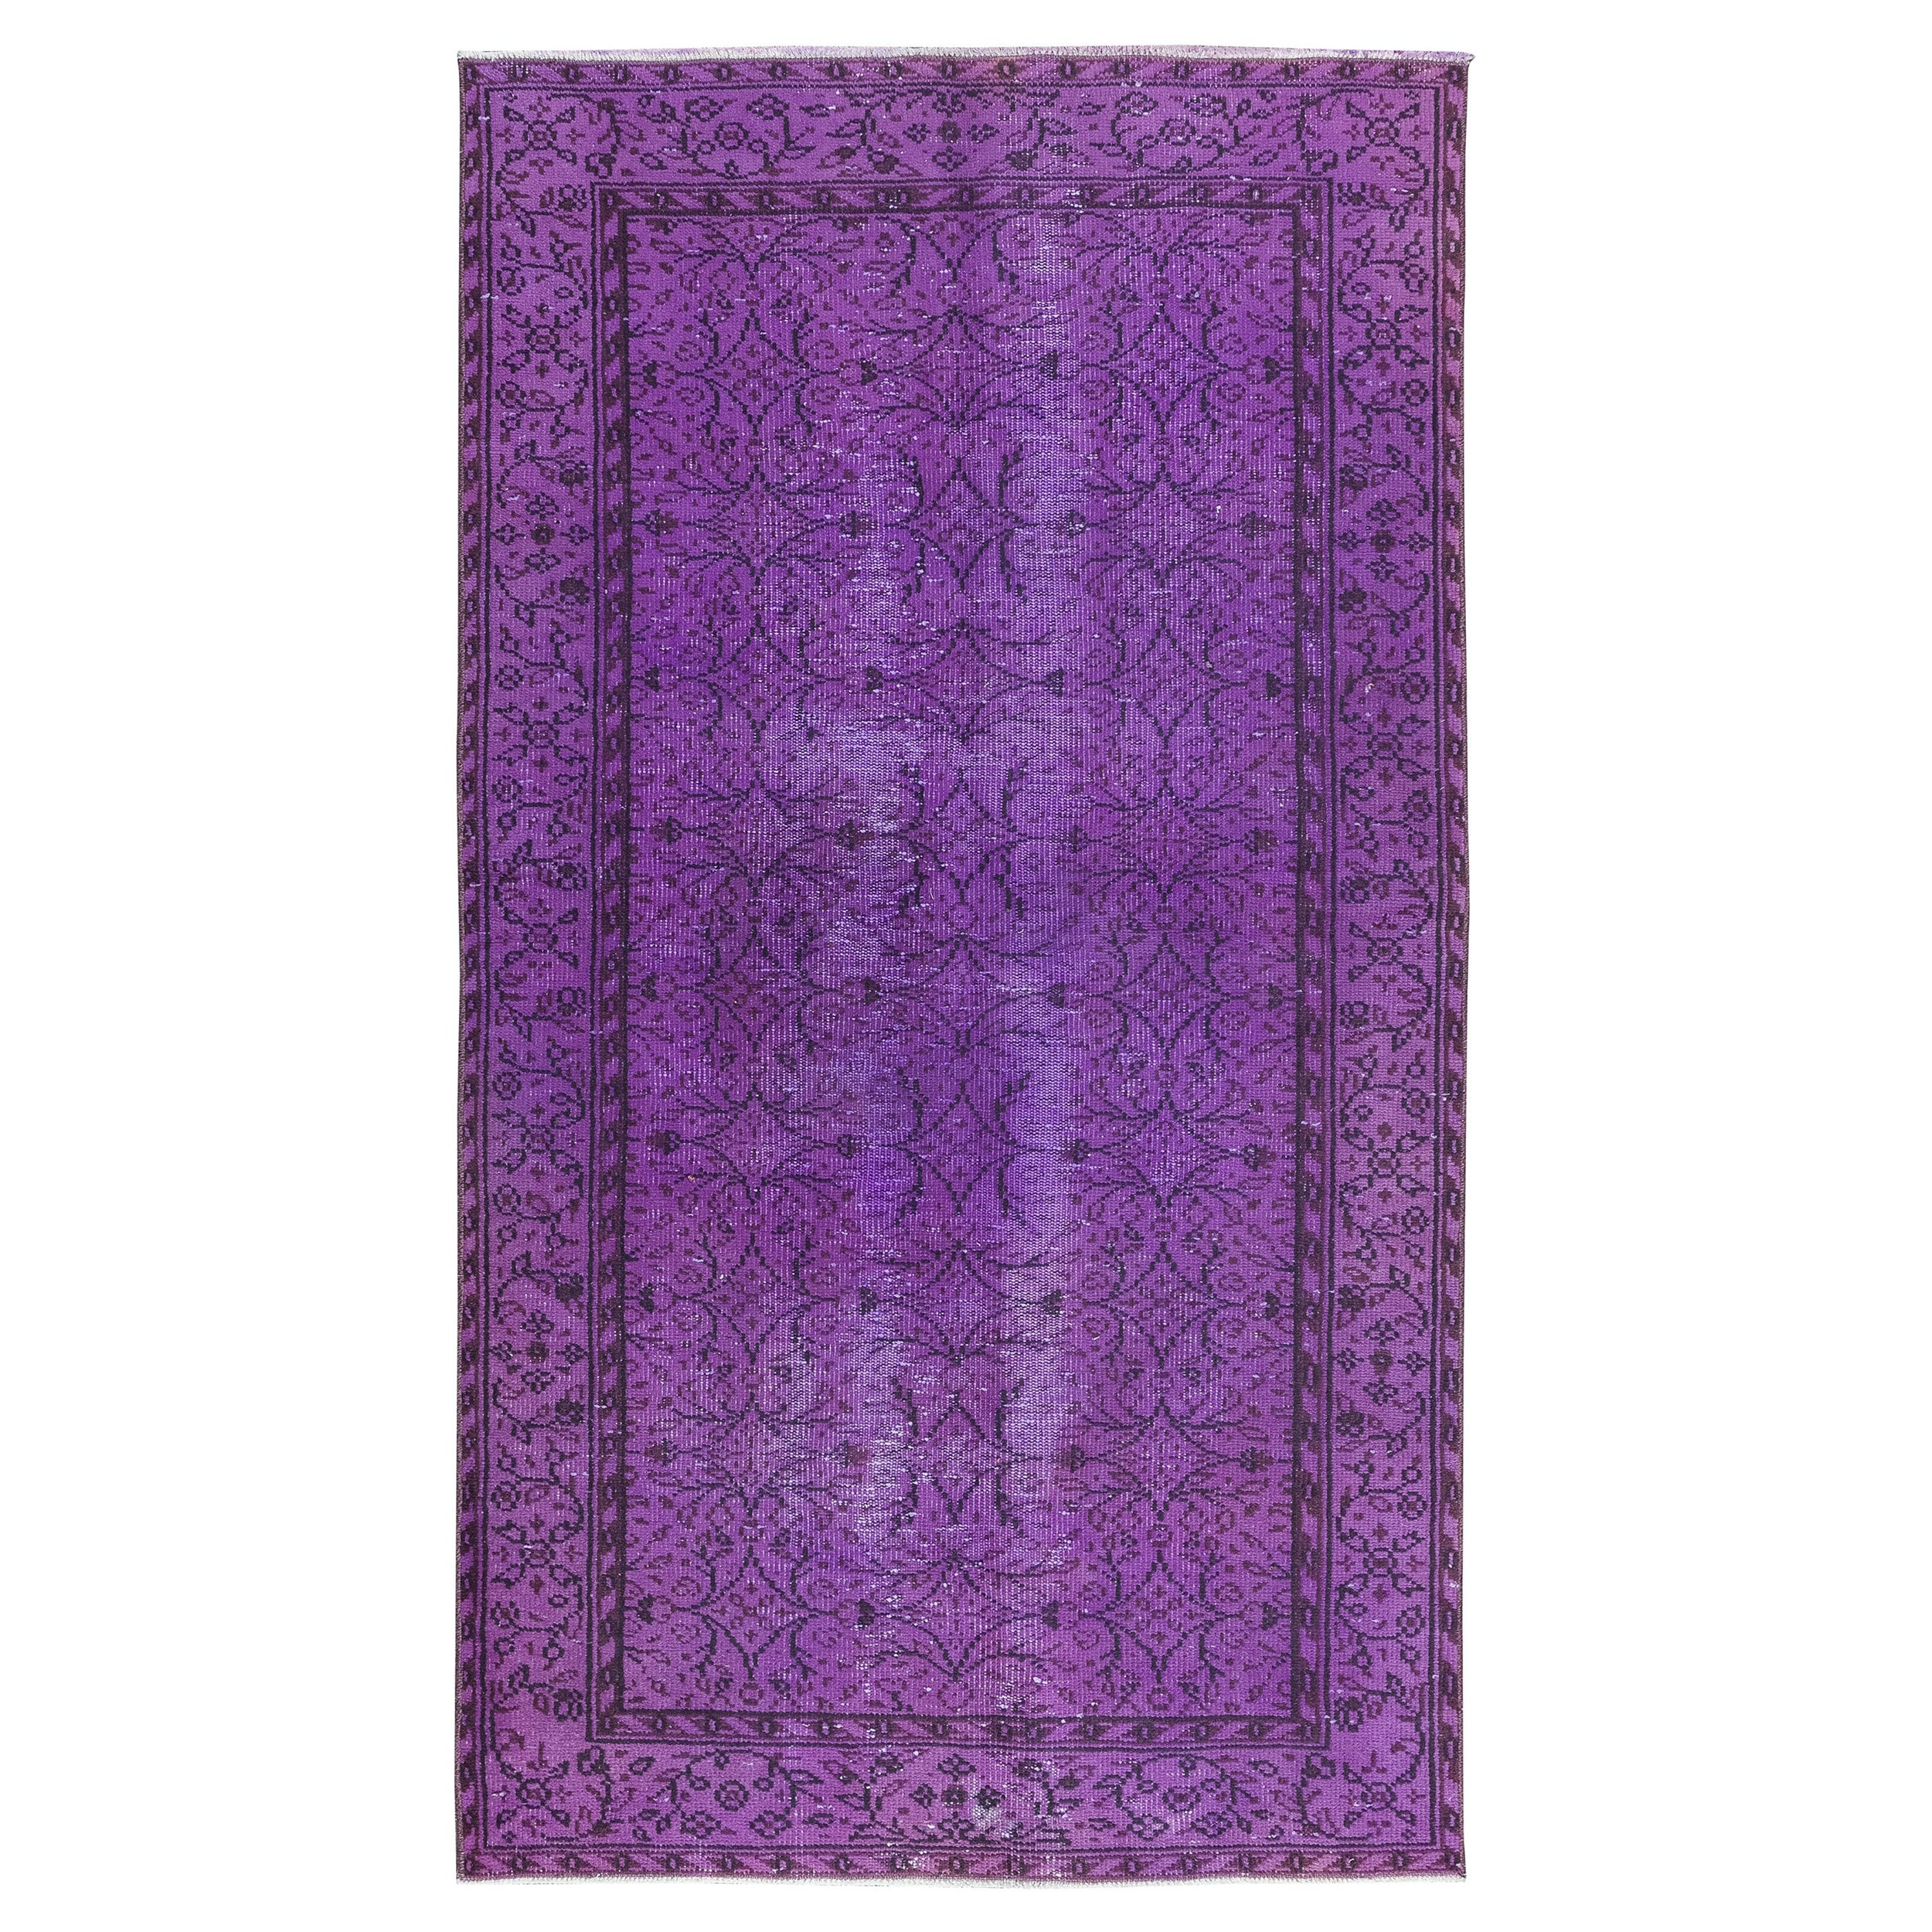 4.2x7.6 Ft Contemporary Living Room Carpet in Purple, Handmade Turkish Area Rug For Sale